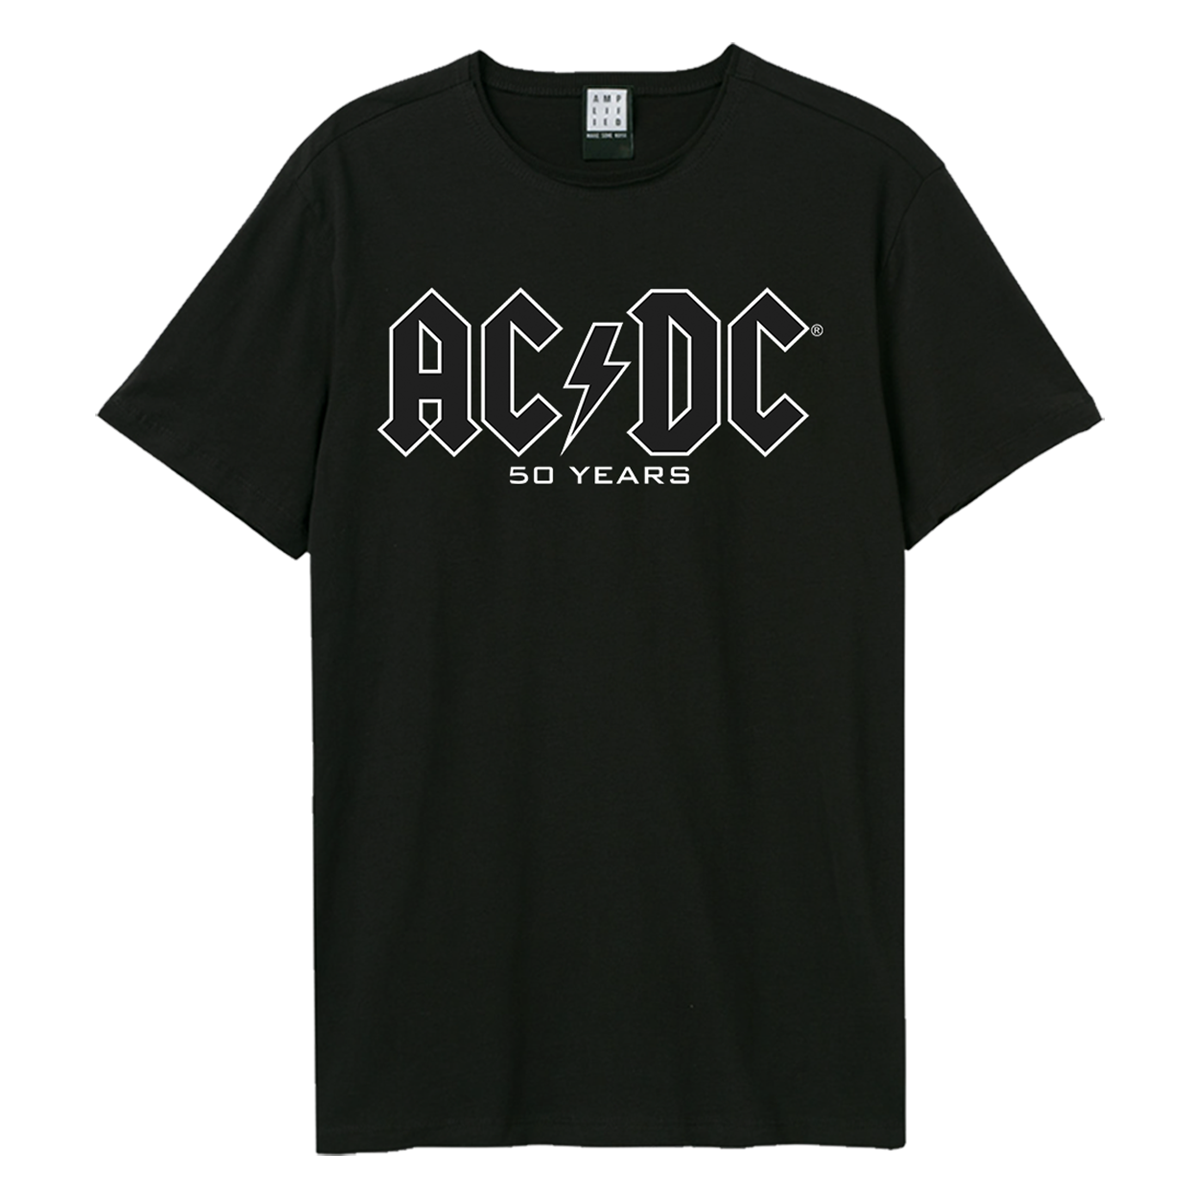 ACDC - History of a Tee